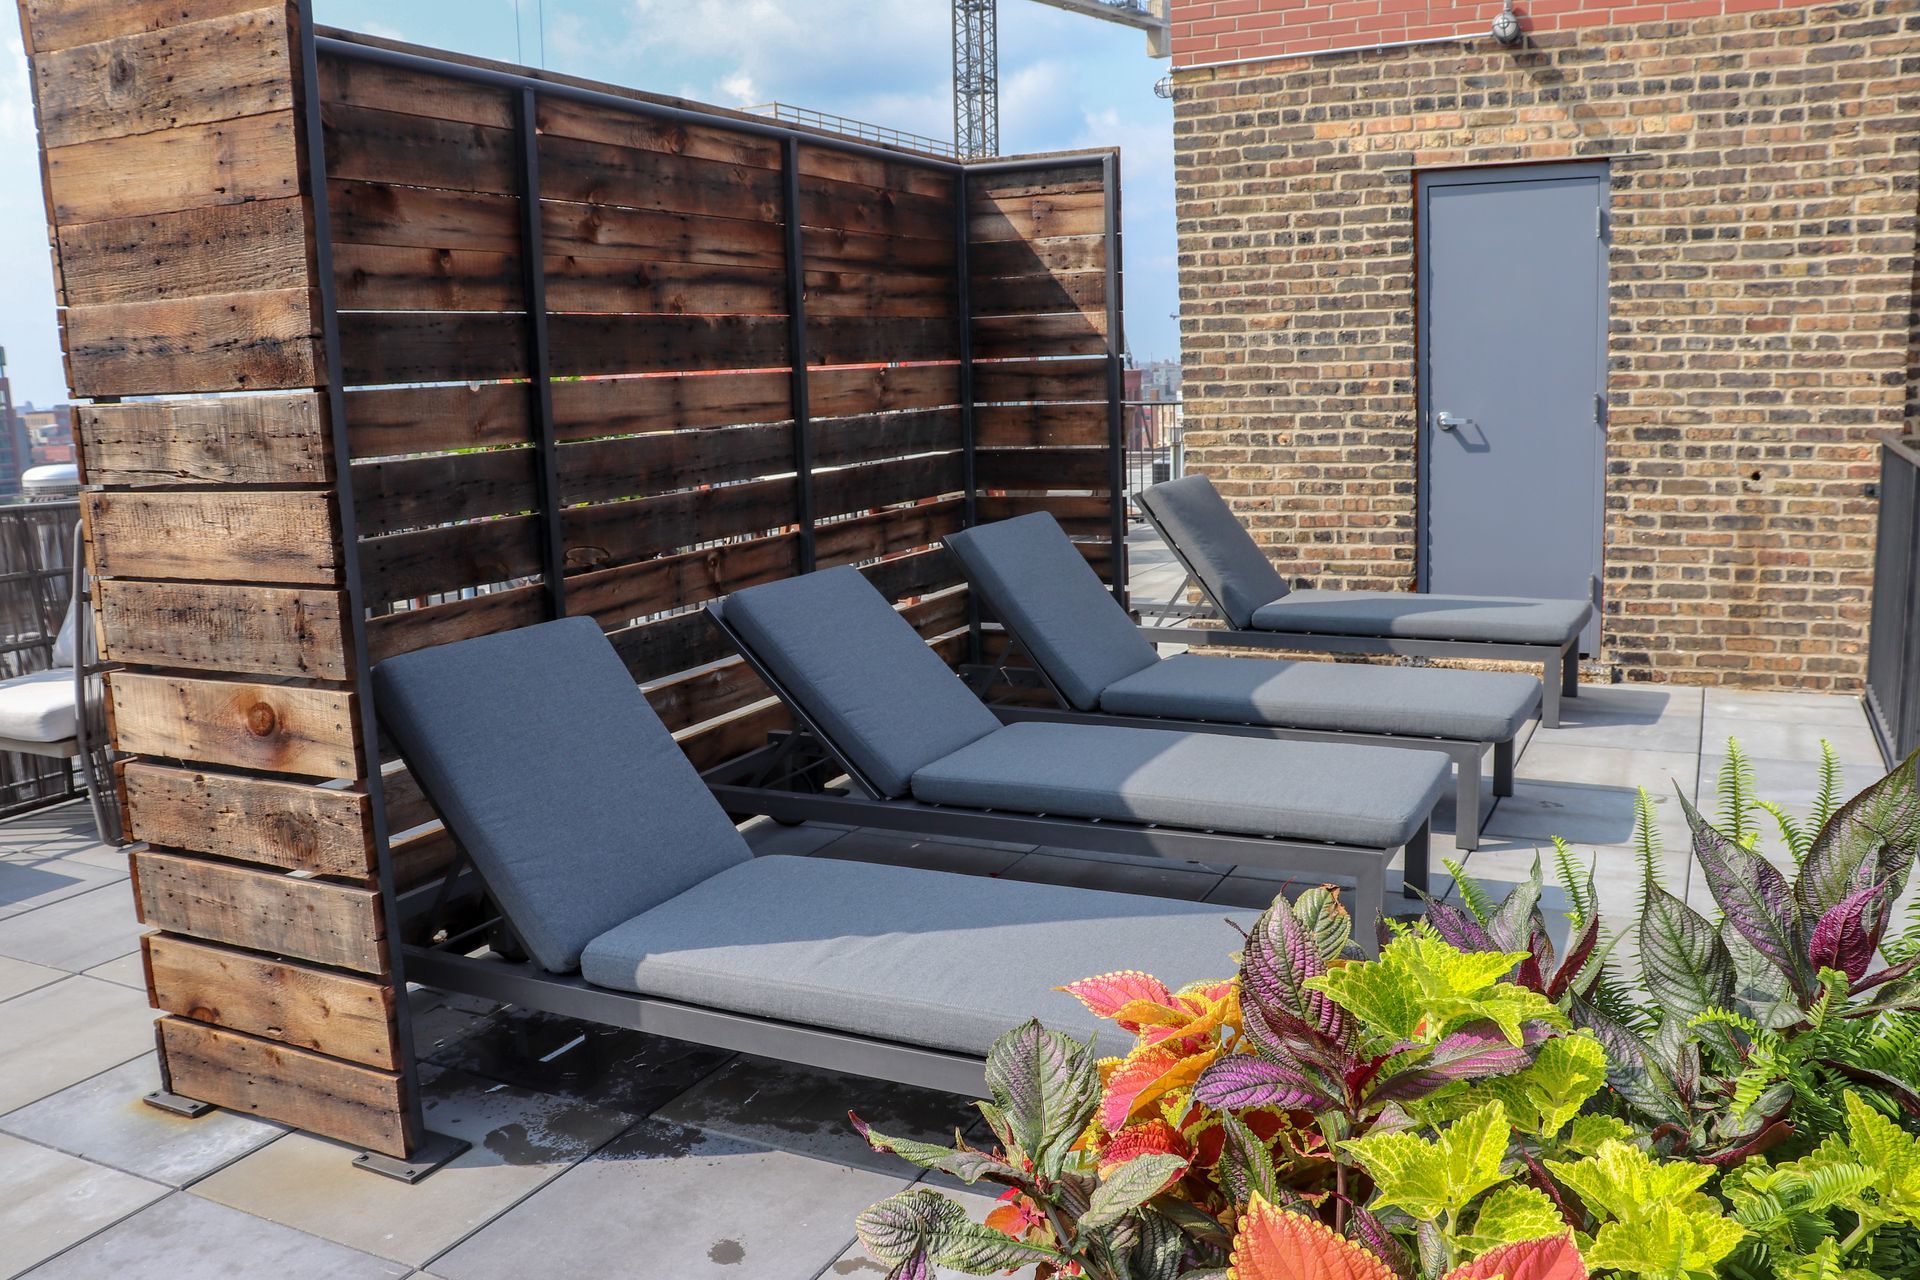 A row of lounge chairs are lined up in front of a wooden fence at The Lofts at Gin Alley.